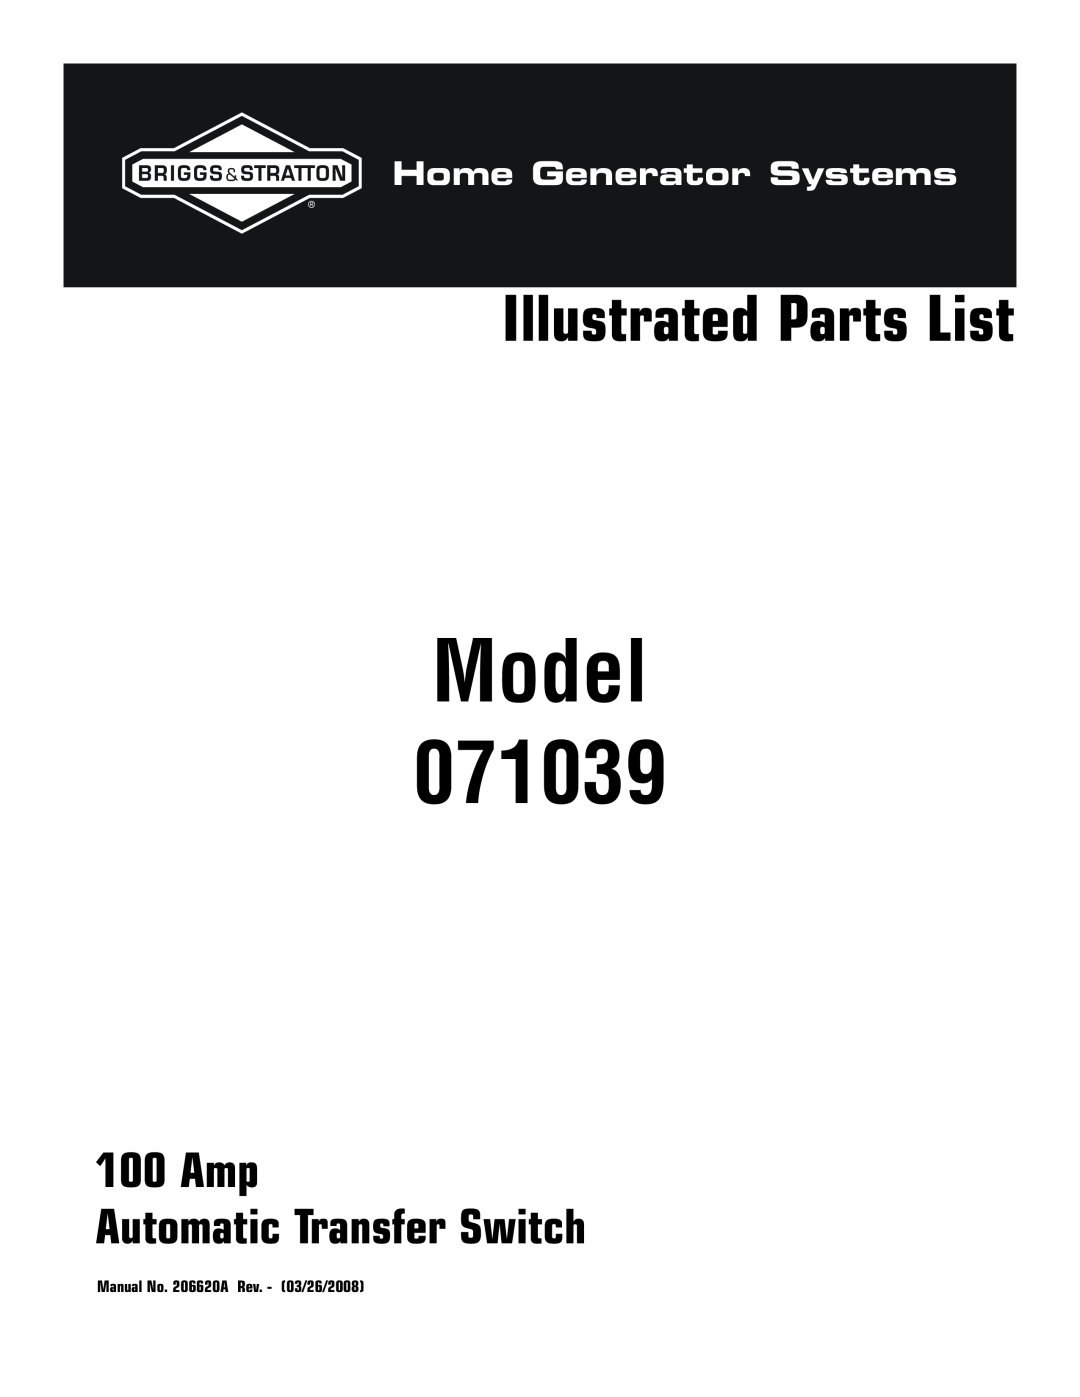 Briggs & Stratton 71039 manual Model, Illustrated Parts List, Amp Automatic Transfer Switch, Home Generator Systems 